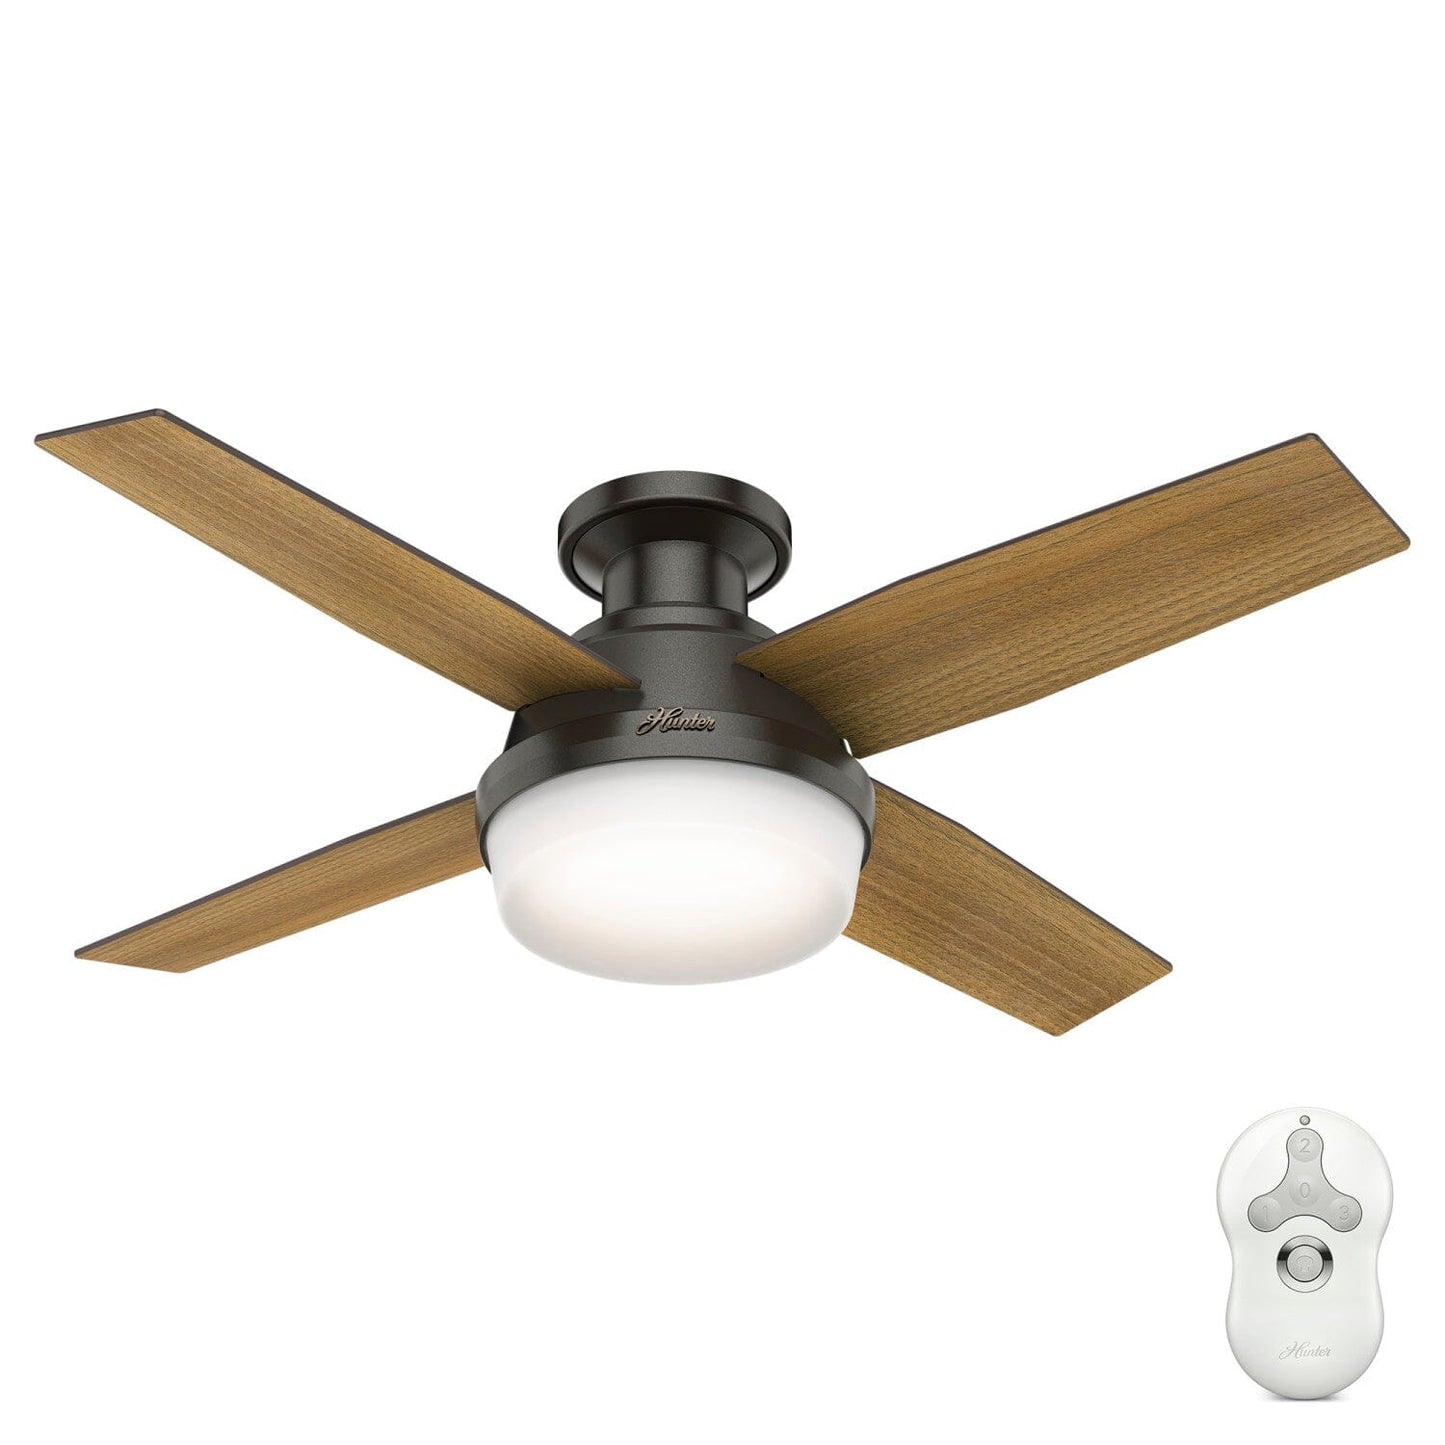 Dempsey Low Profile with Light 44 inch Ceiling Fans Hunter Noble Bronze - Mid Century Walnut 